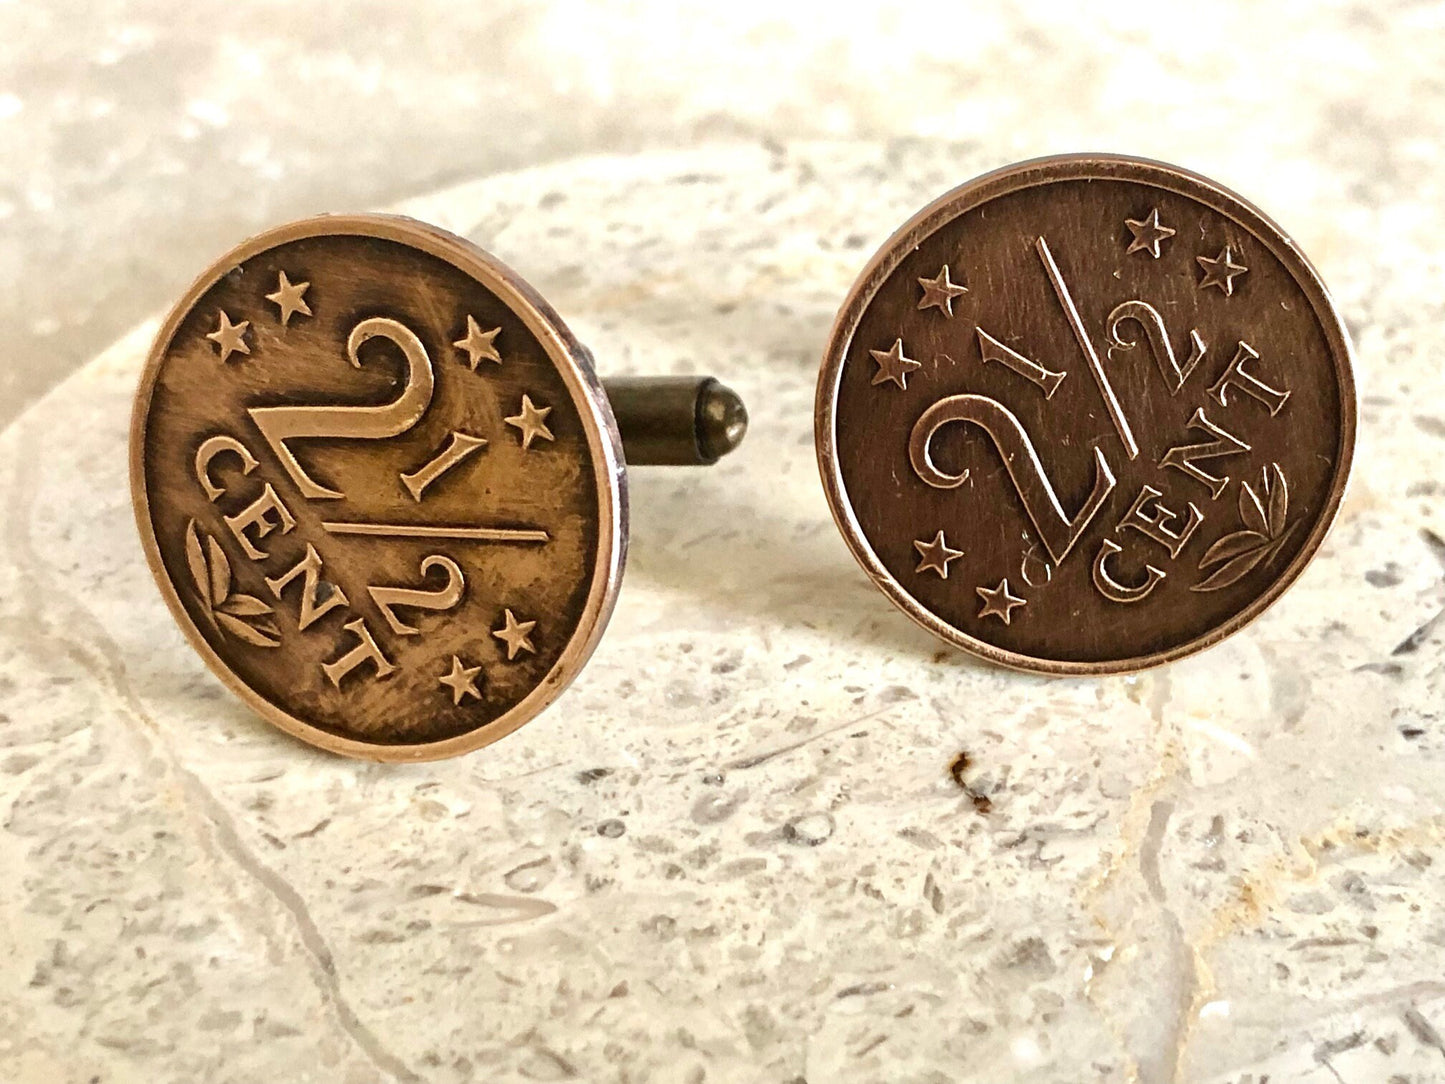 Netherlands Coin Cuff Links 2 1/2 Cents Custom Made Vintage and Rare coins - Coin Enthusiast - Suit and Tie Accessory